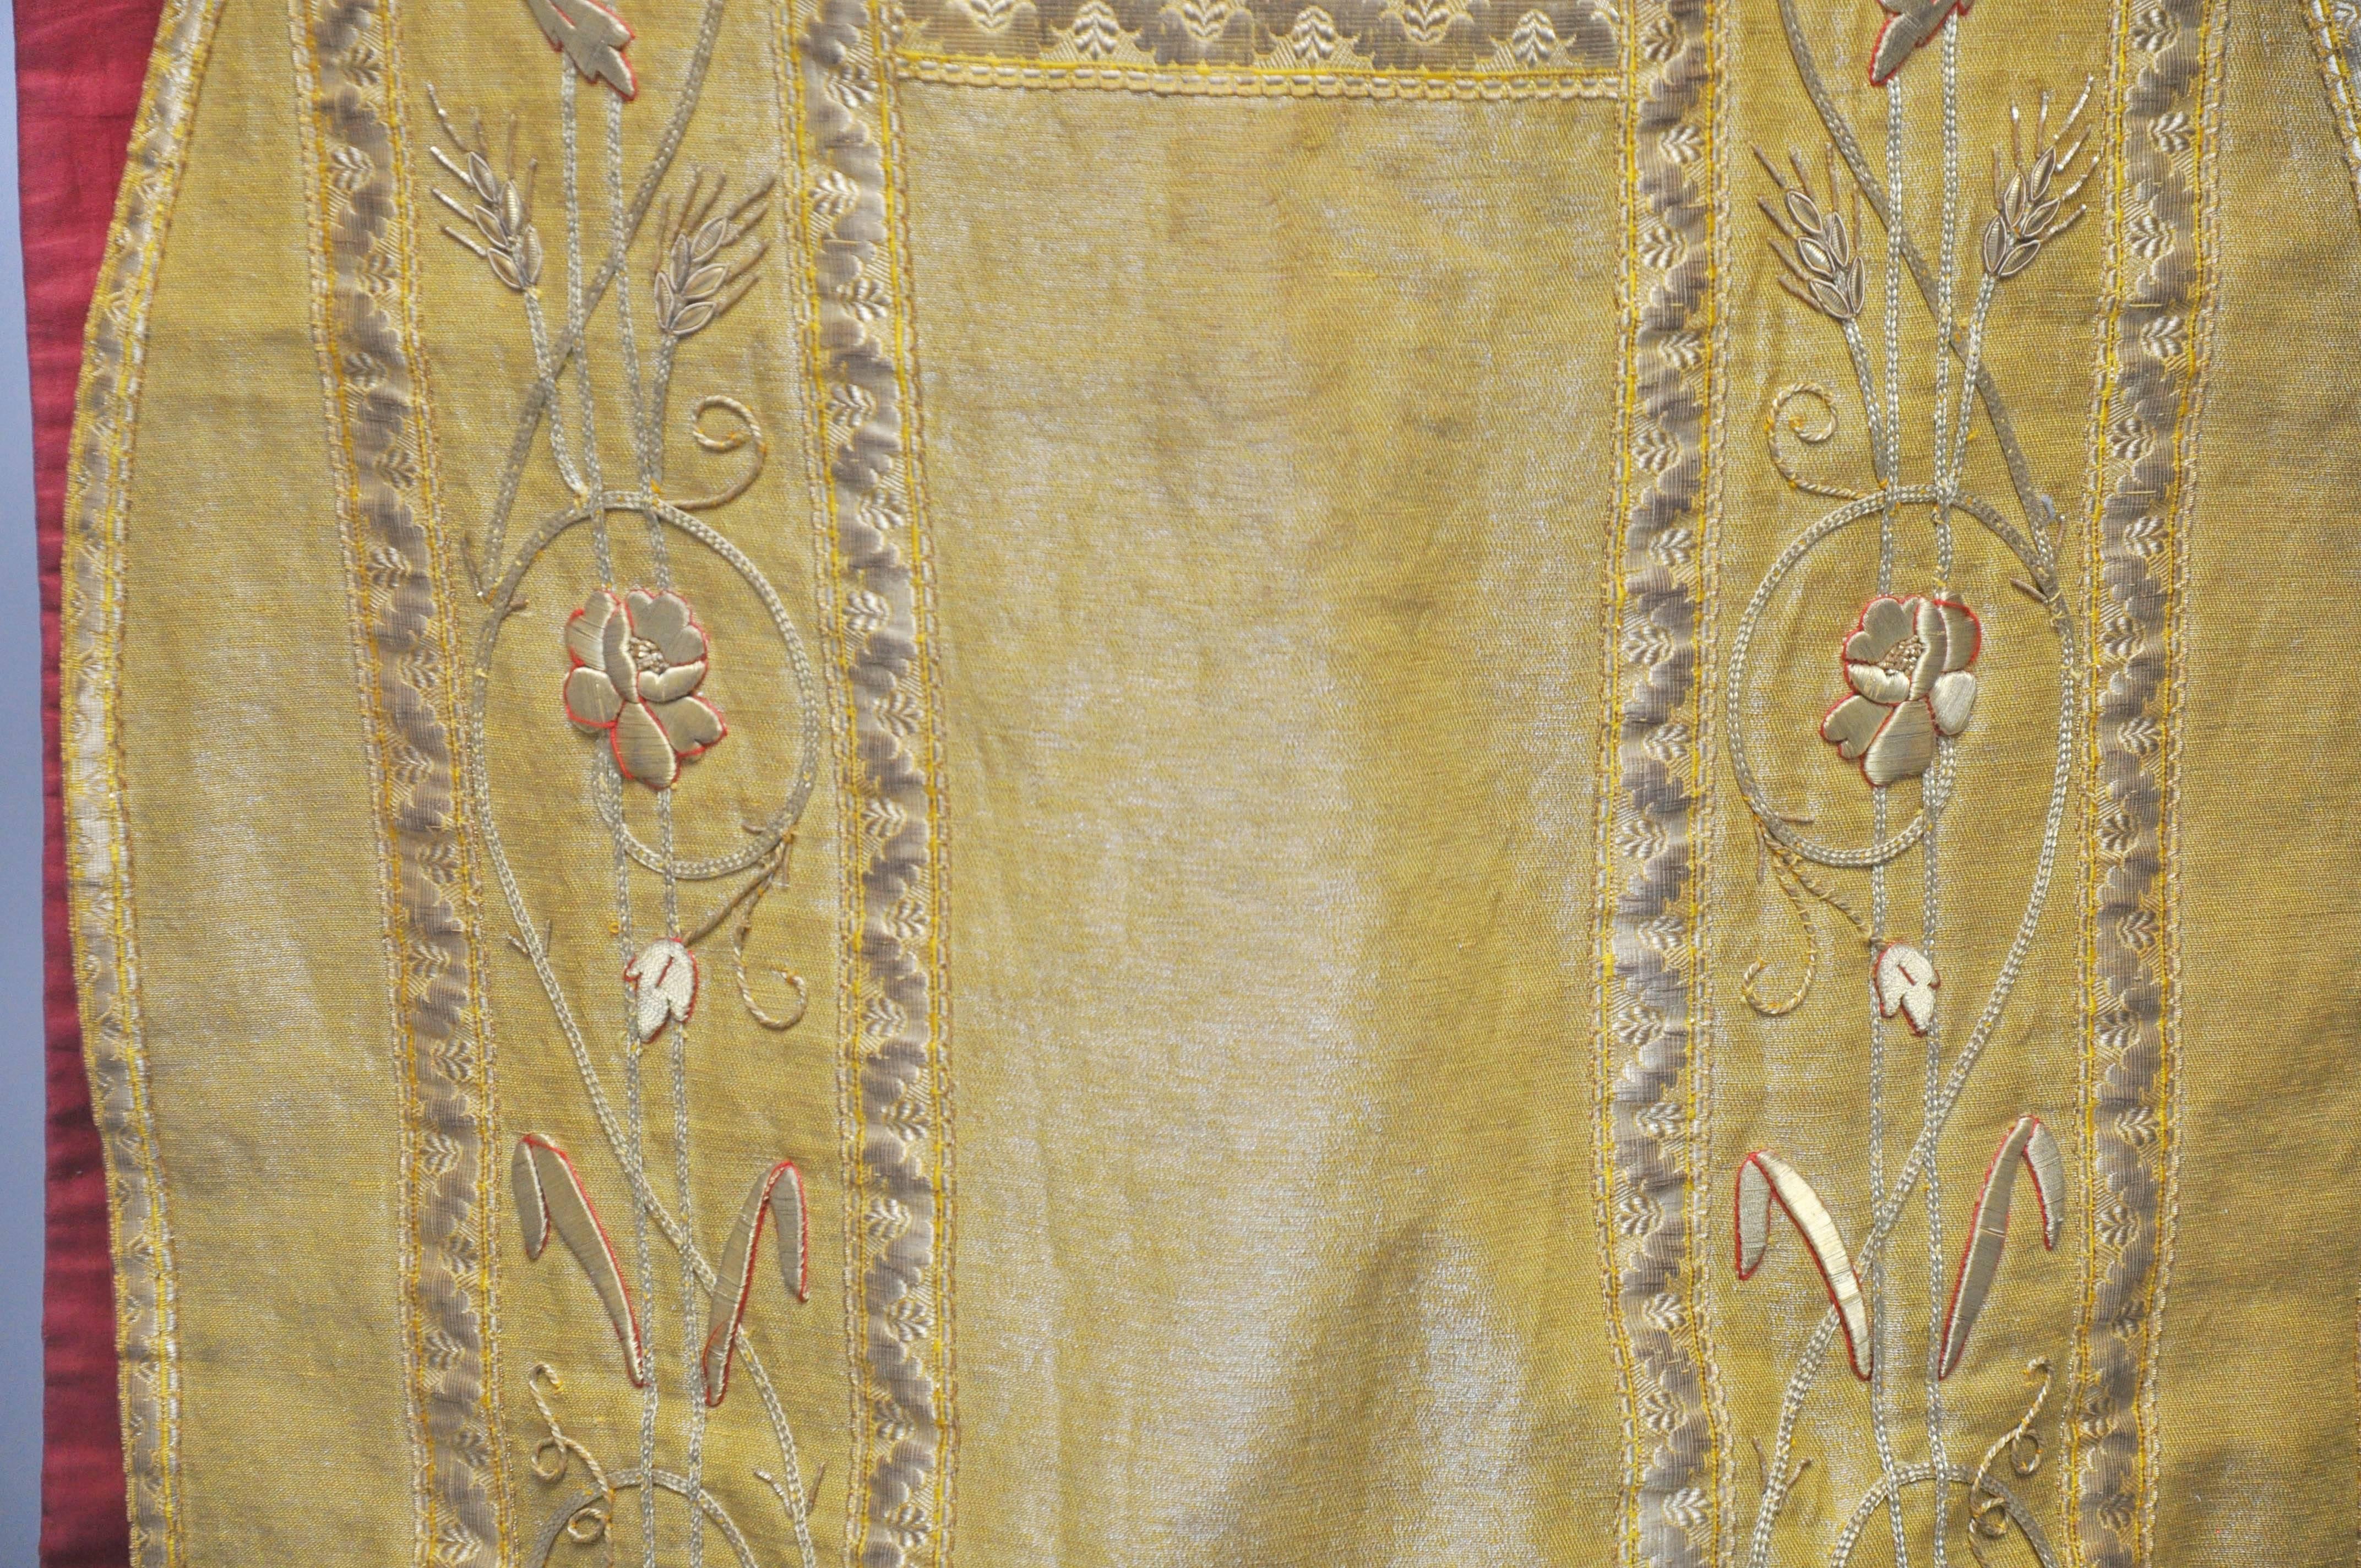 19th Century Religious Silk Vestment In Excellent Condition For Sale In Chicago, IL